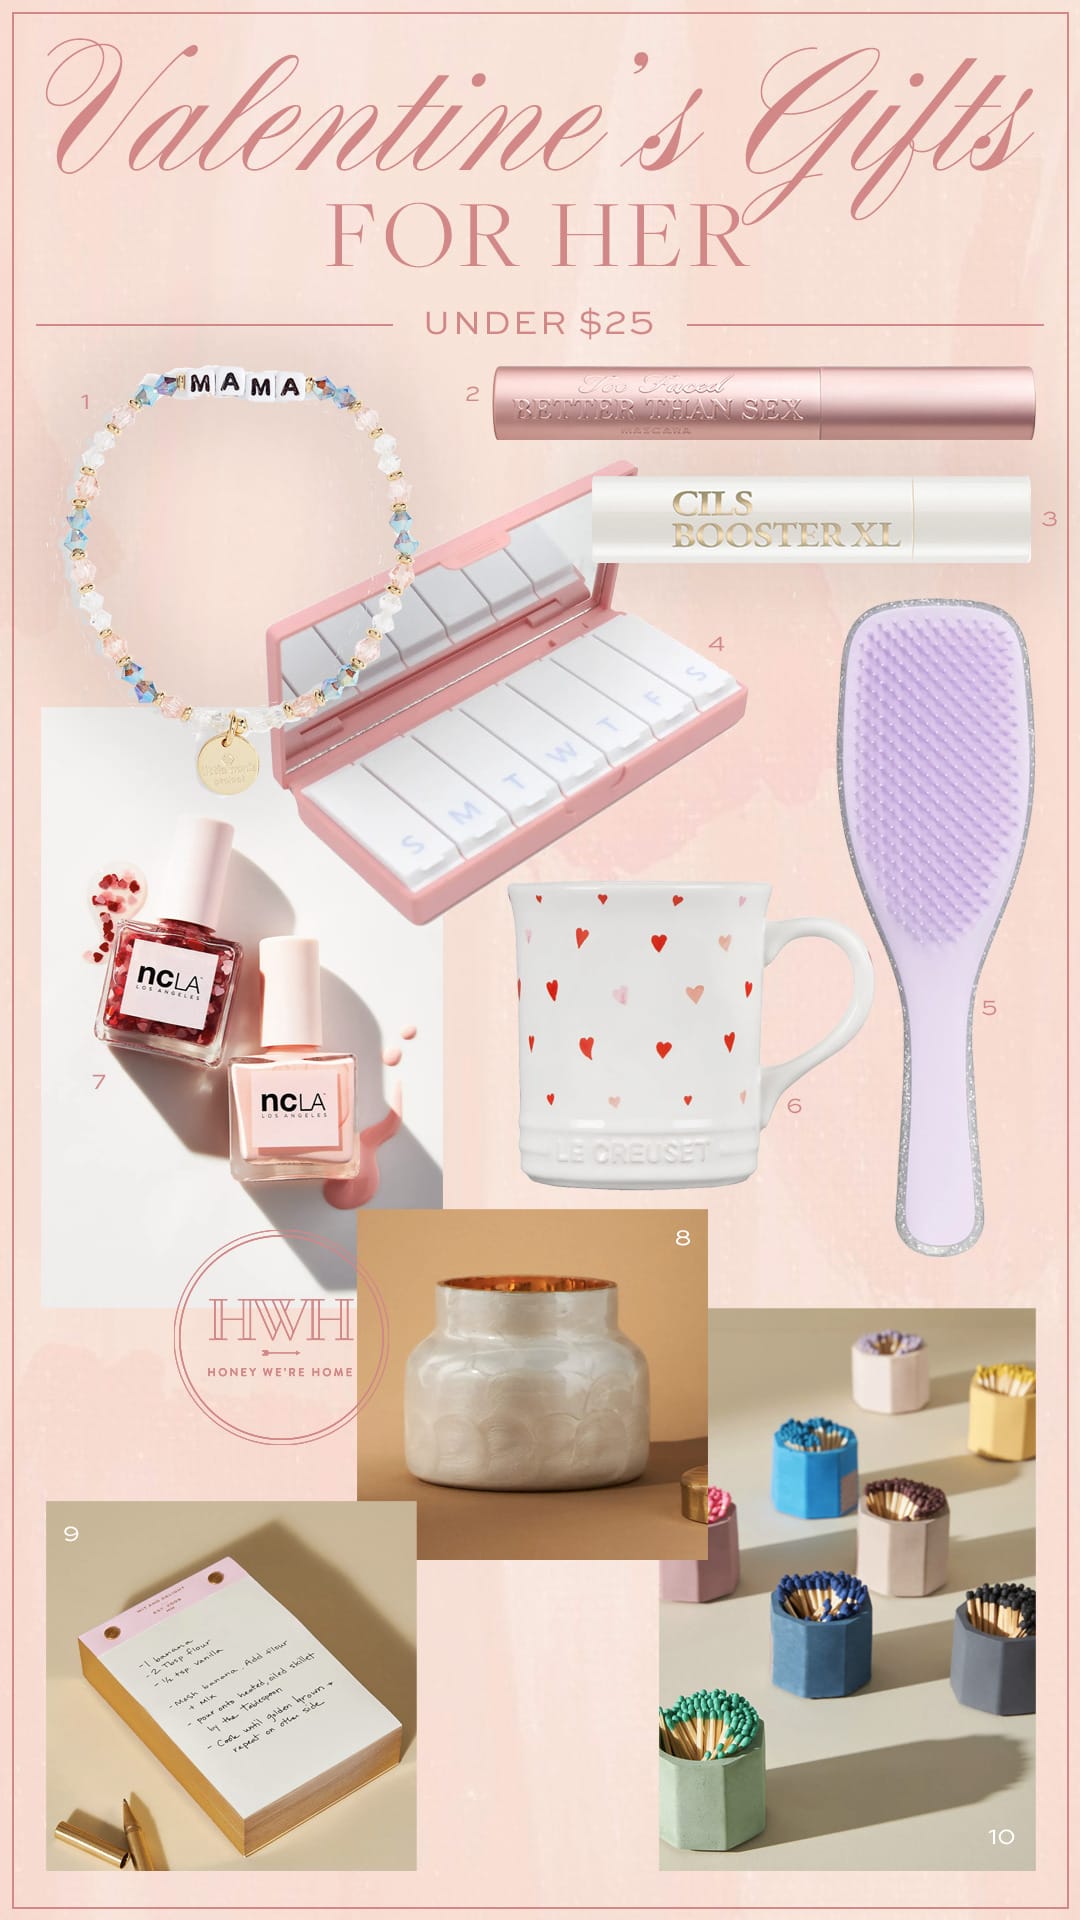 Valentine's Gifts for Her under $25 